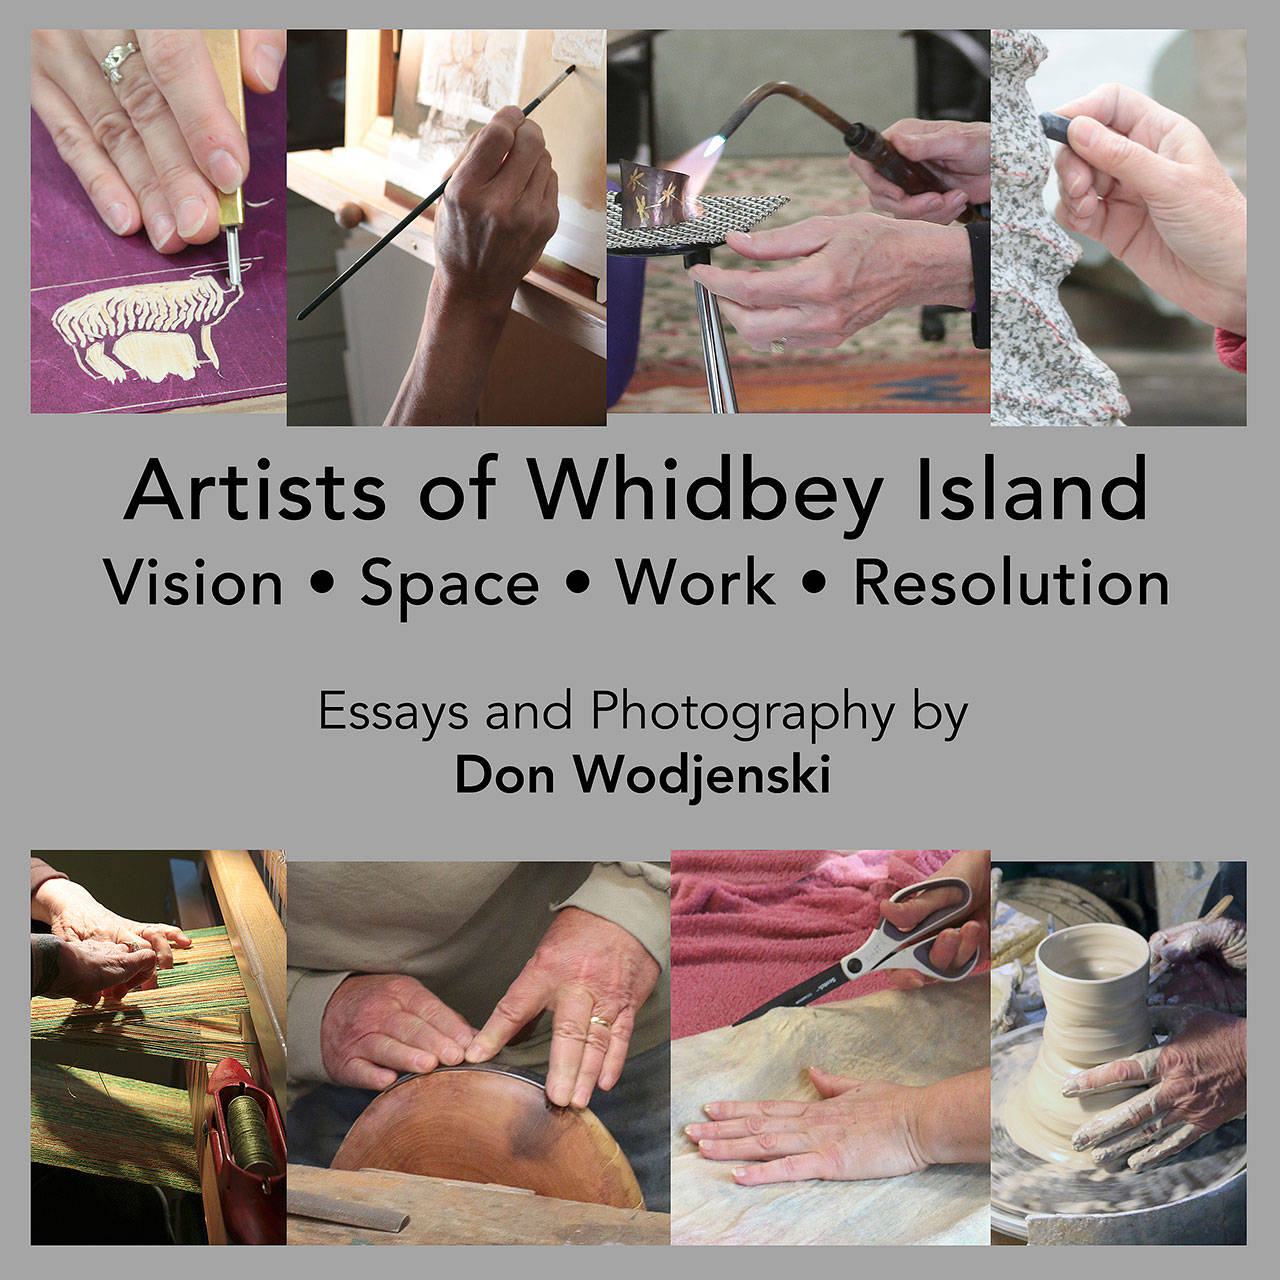 Front cover of “Artists of Whidbey Island: Vision, Space, Work, Resolution” by Don Wodjenski.